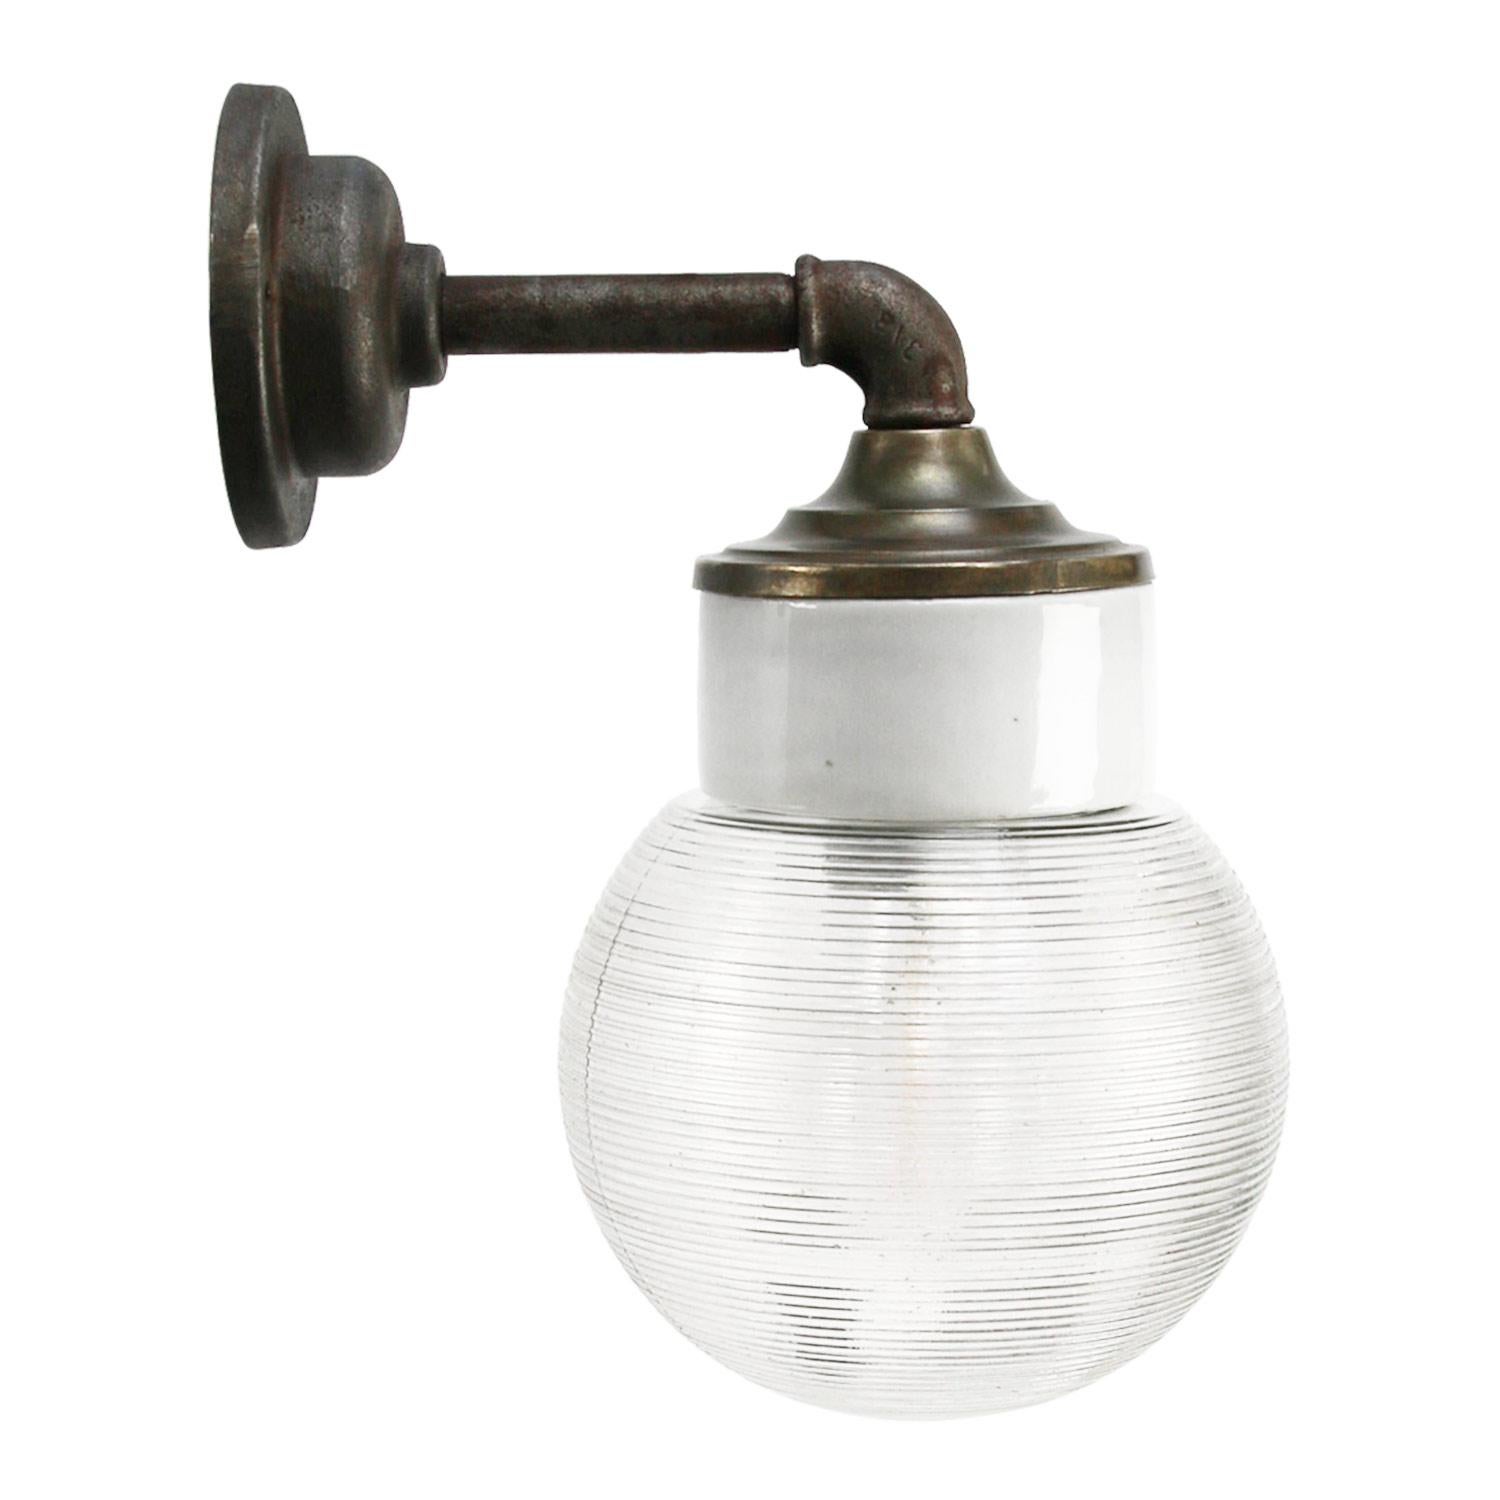 Porcelain Industrial wall lamp.
White porcelain, brass and cast iron
Clear striped glass.
2 conductors, no ground.

Diameter wall mount 10.5 cm / 4”.
2 holes to secure.

For use inside only

Measures: Weight: 2.05 kg / 4.5 lb

Priced per individual